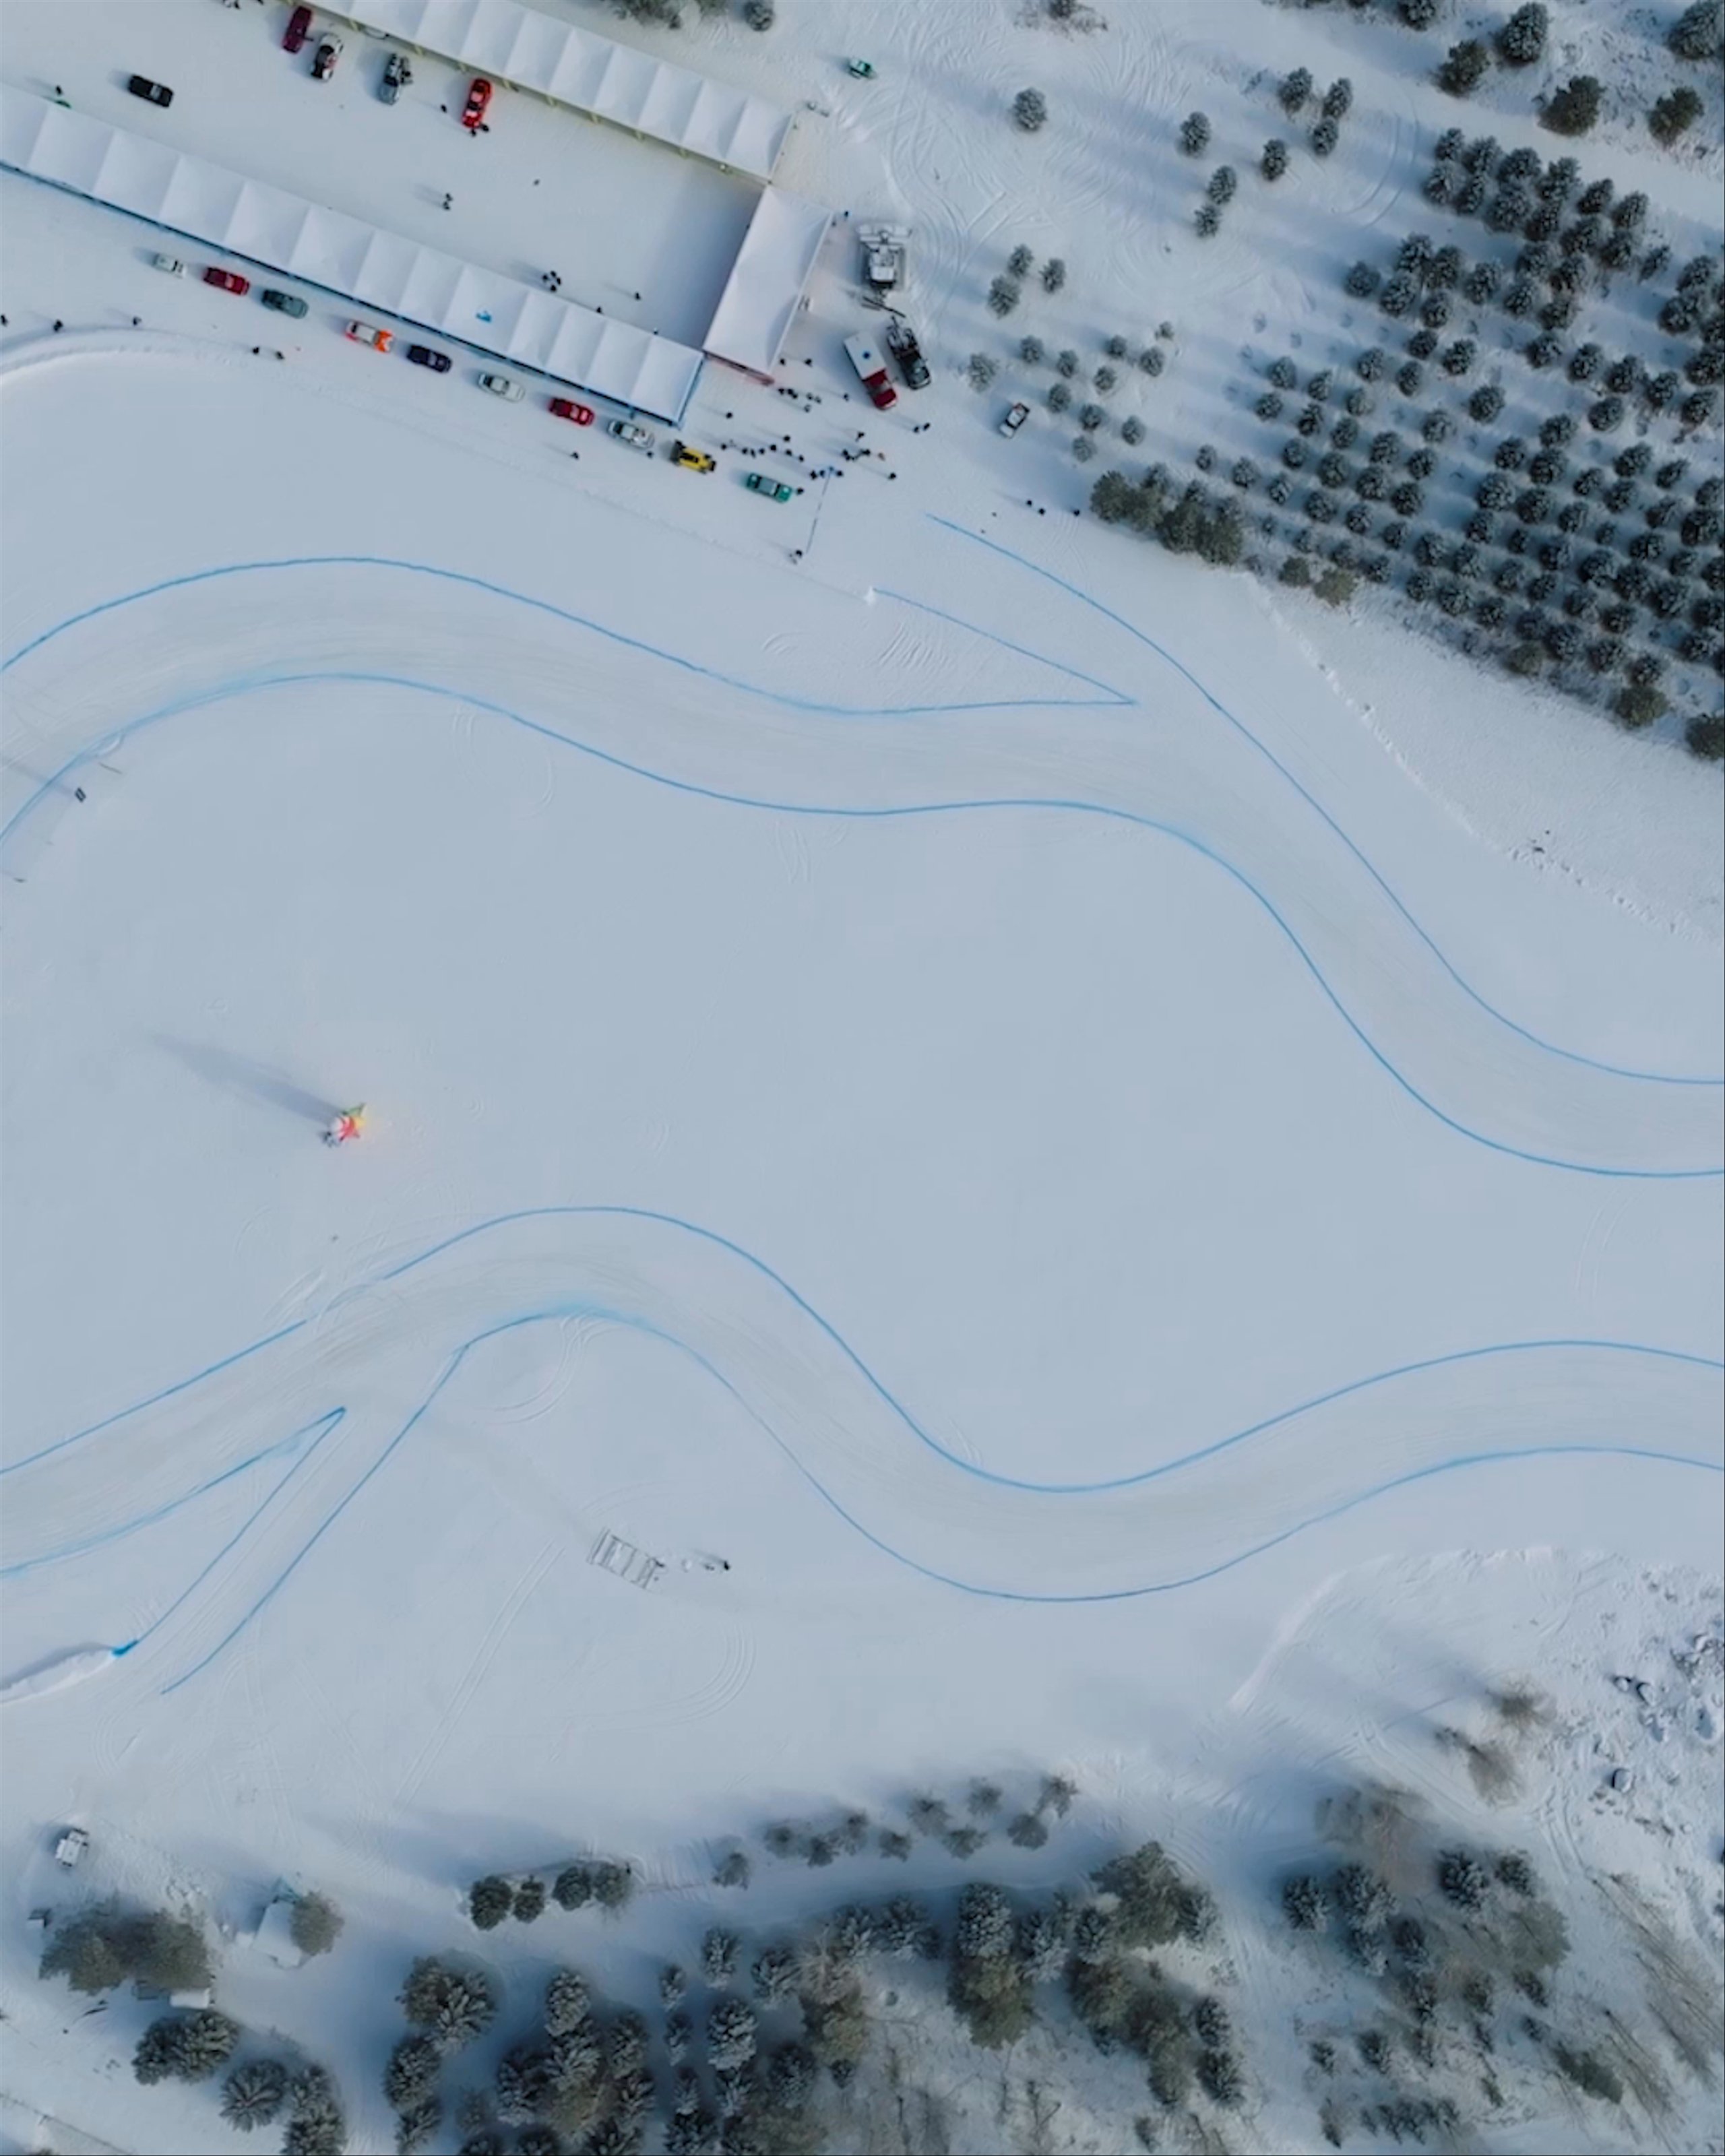 Aerial view of F.A.T. ice race course with cars driving on it